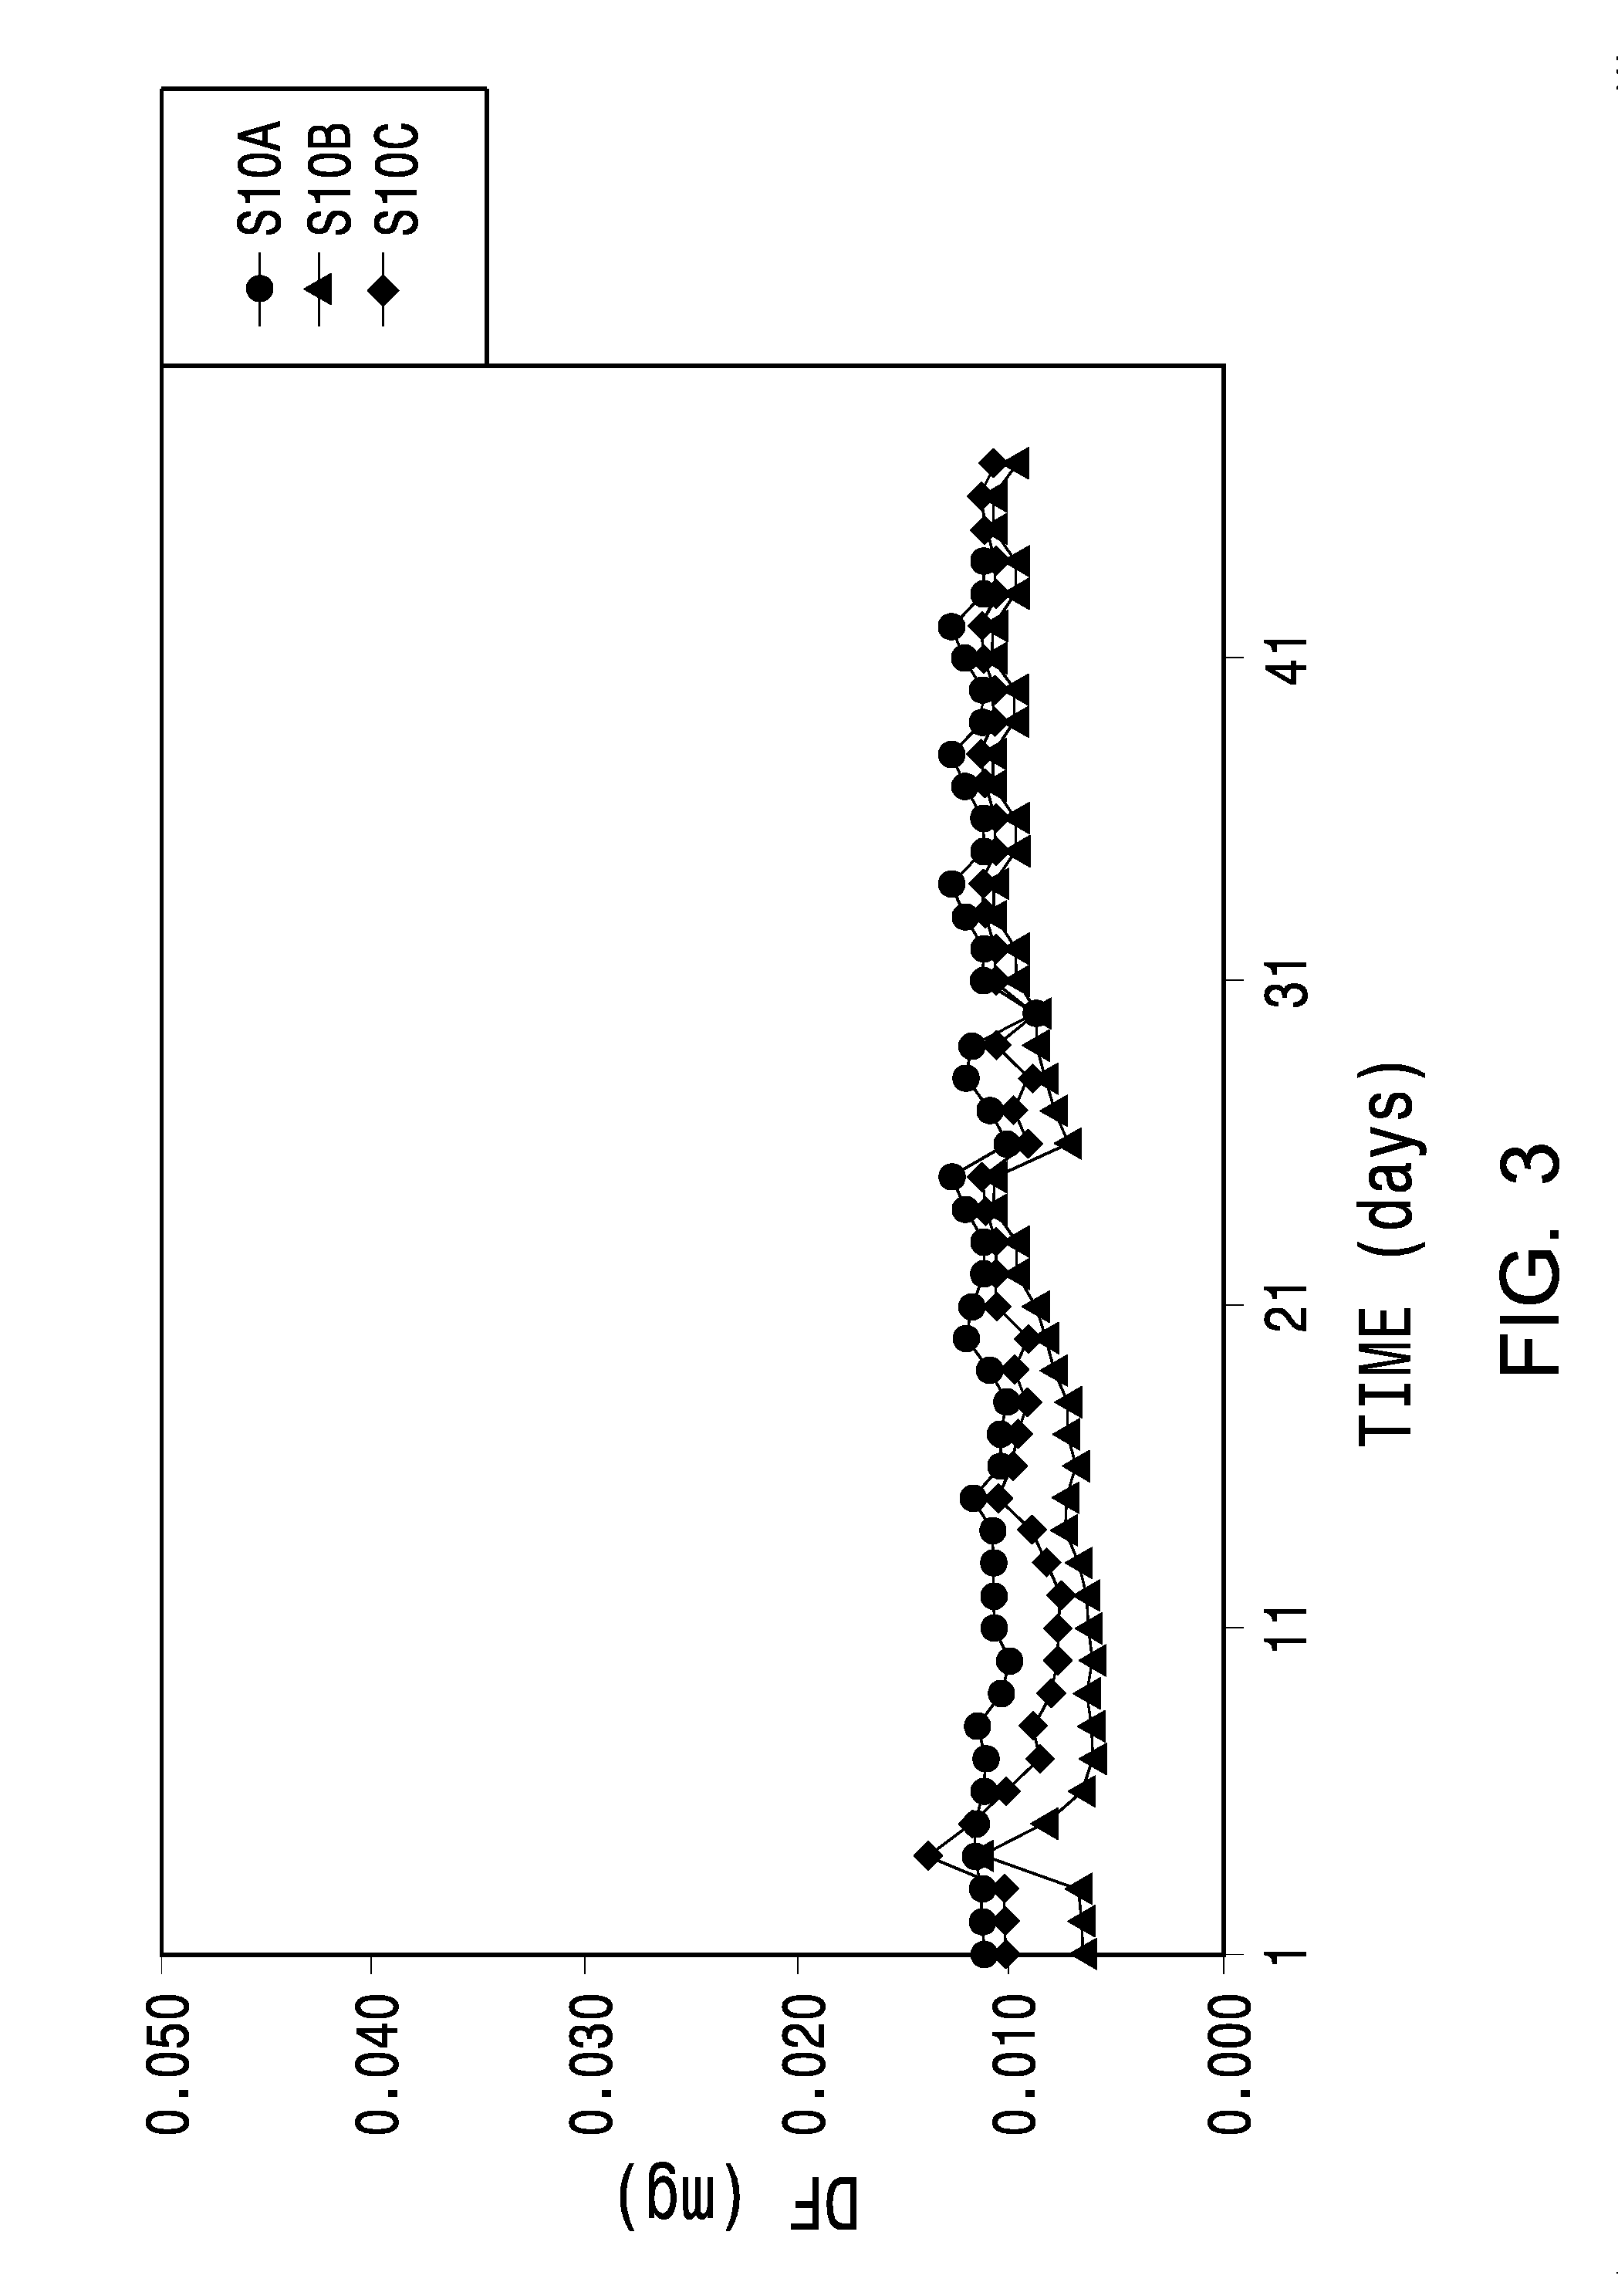 Ocular biodegradable drug implant and method of its use